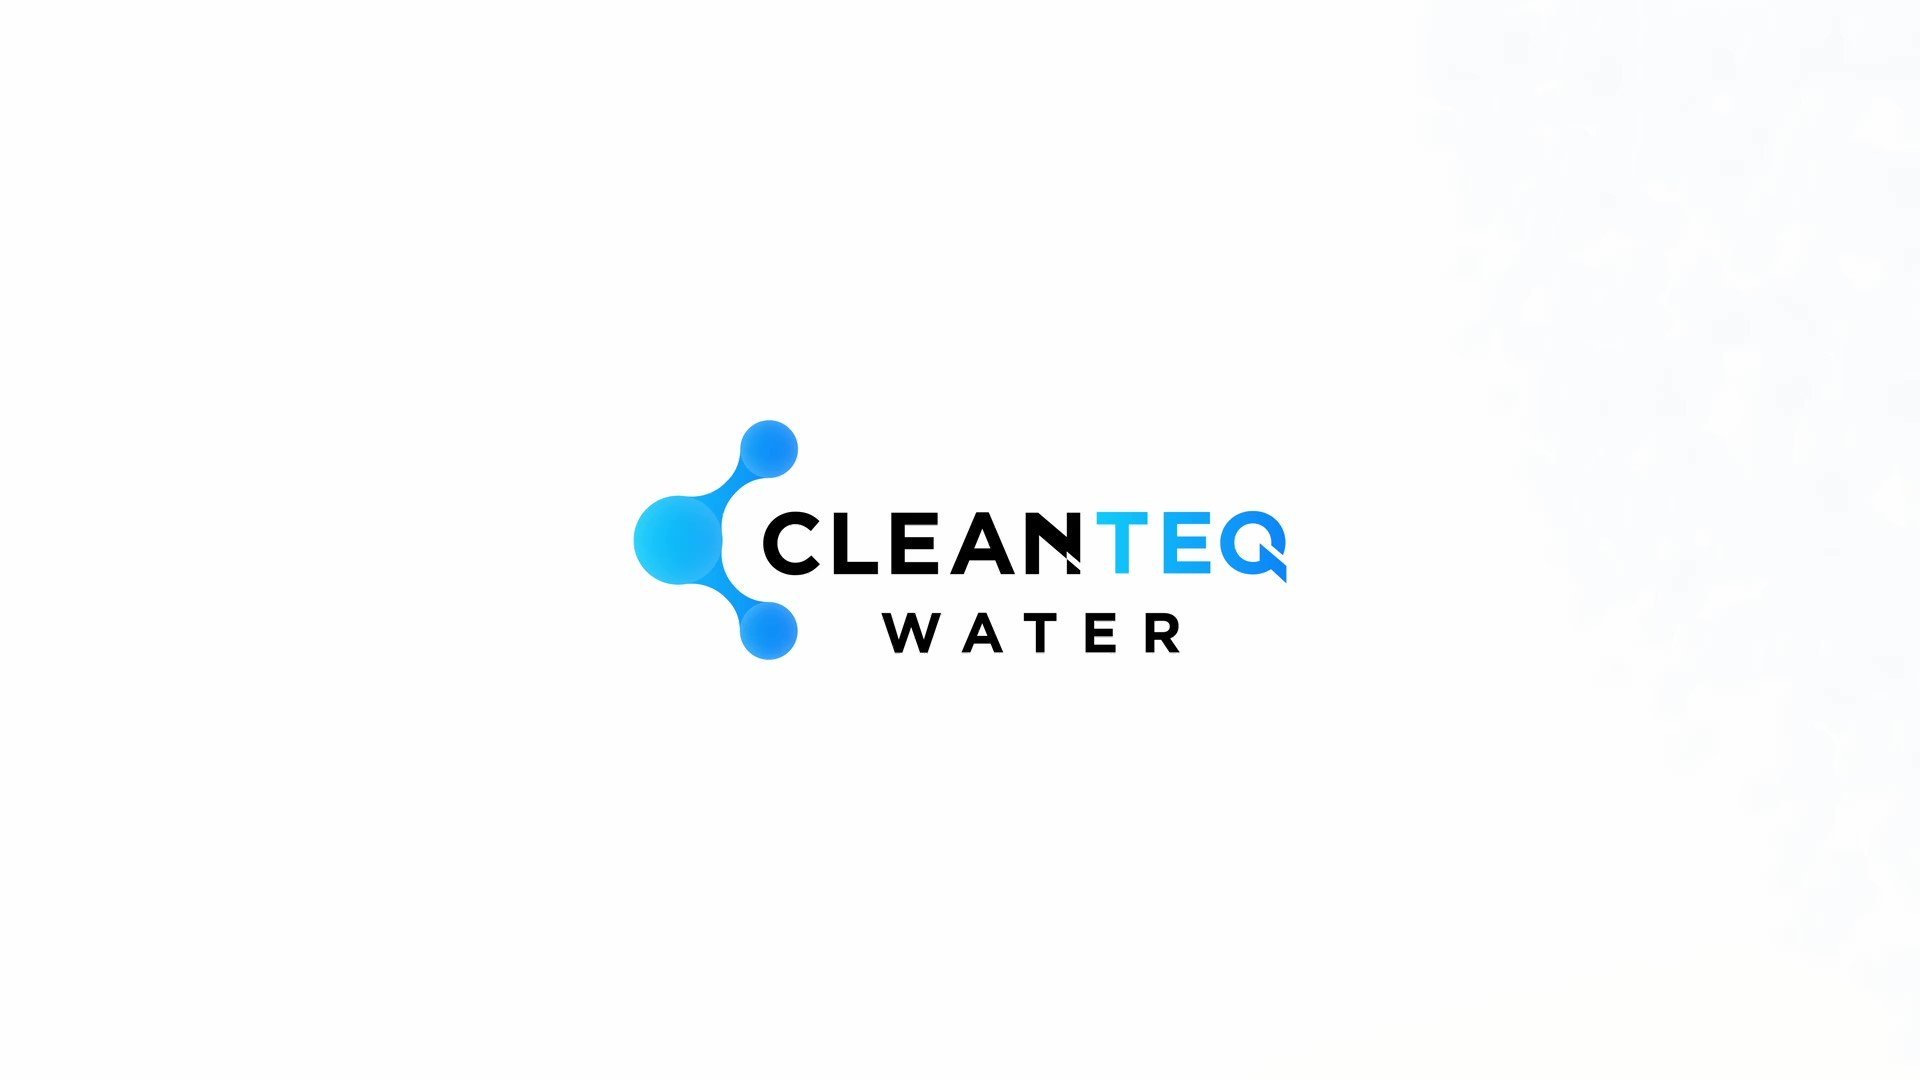 Clean TeQ Water Launches Company Video